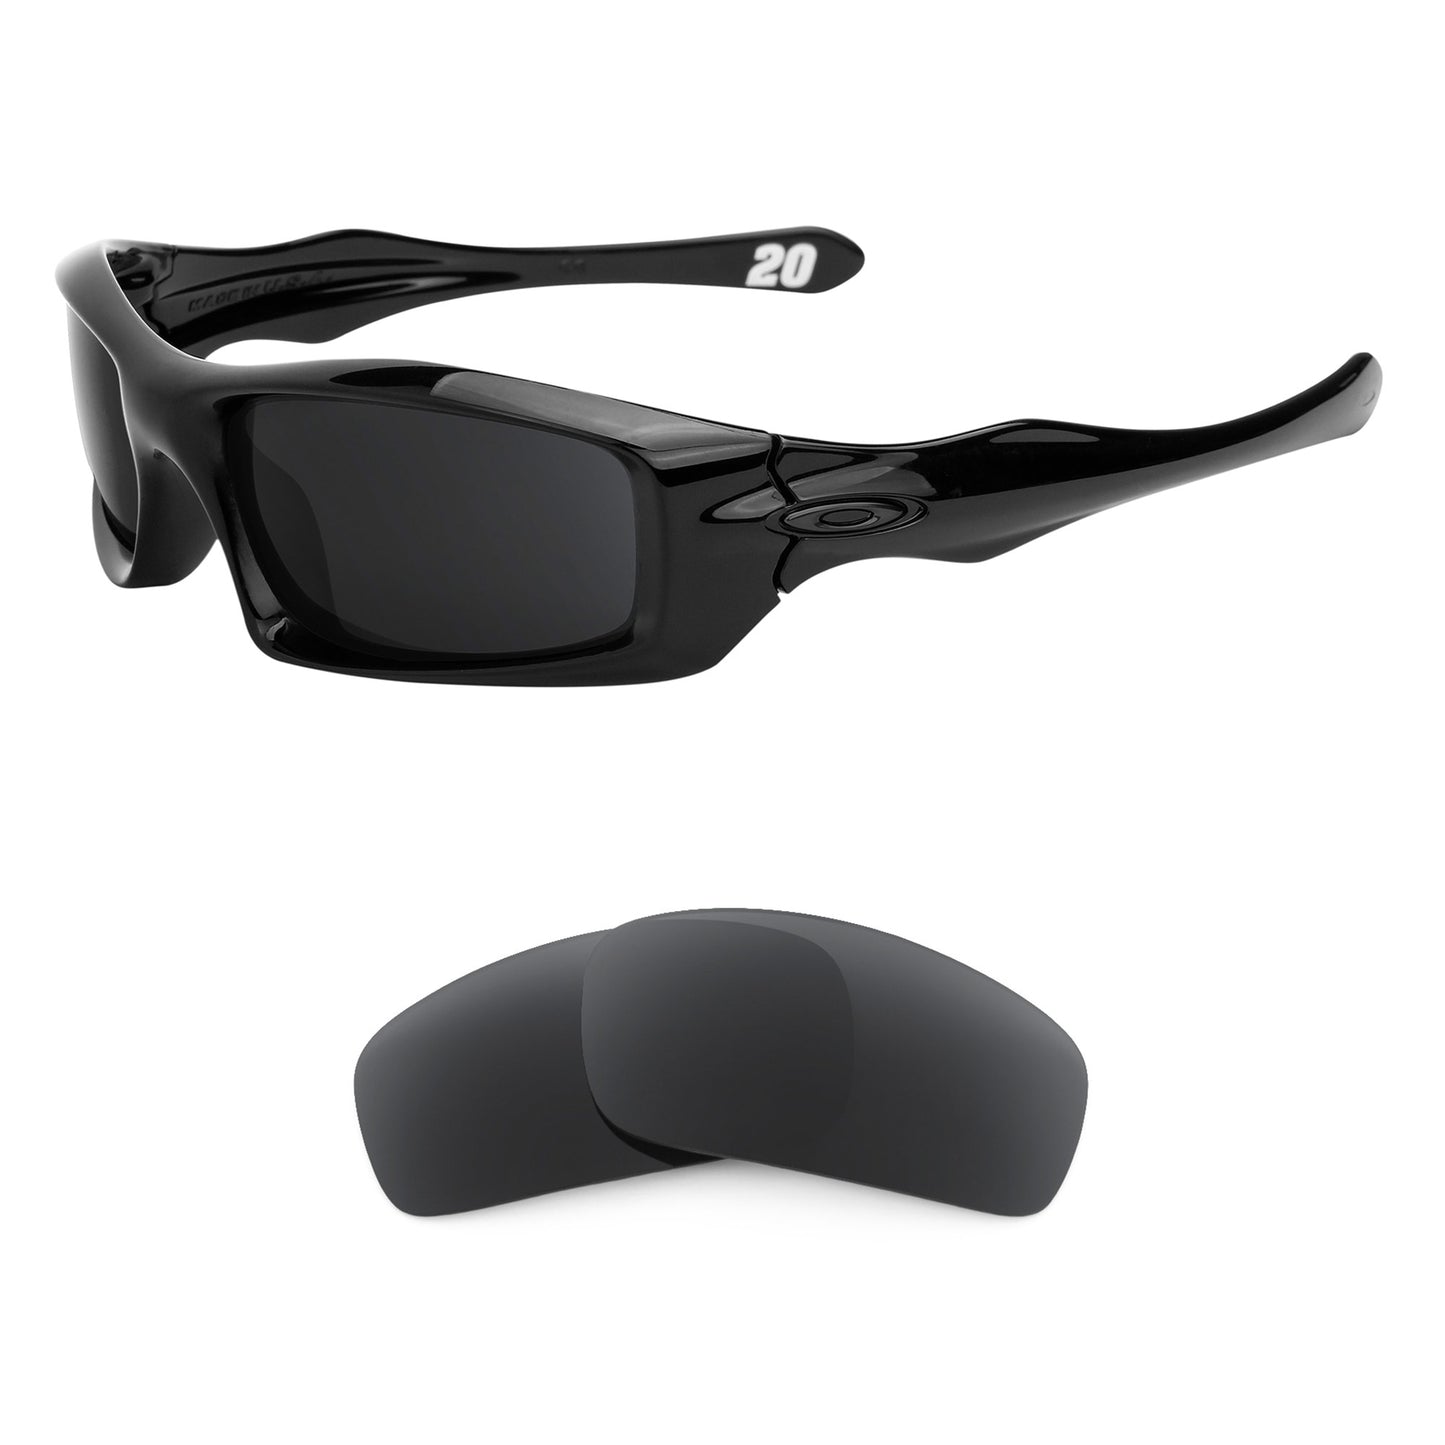 Oakley Monster Pup sunglasses with replacement lenses